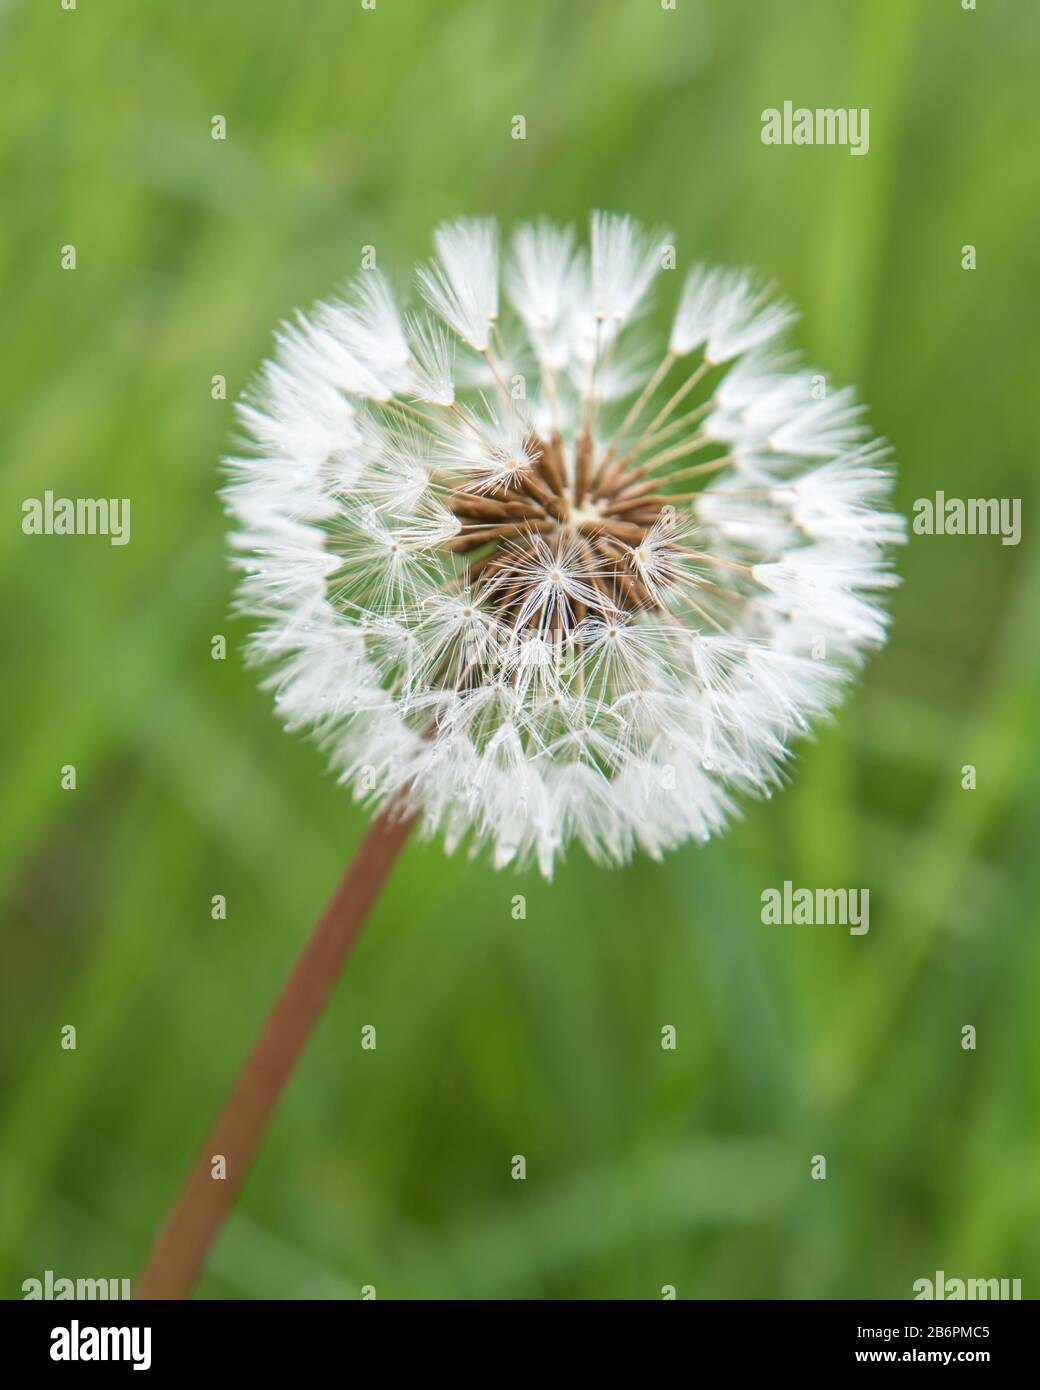 Closeup of one, fuzzy white Dandelion on a stem with a blurred light green background of long grass. Stock Photo